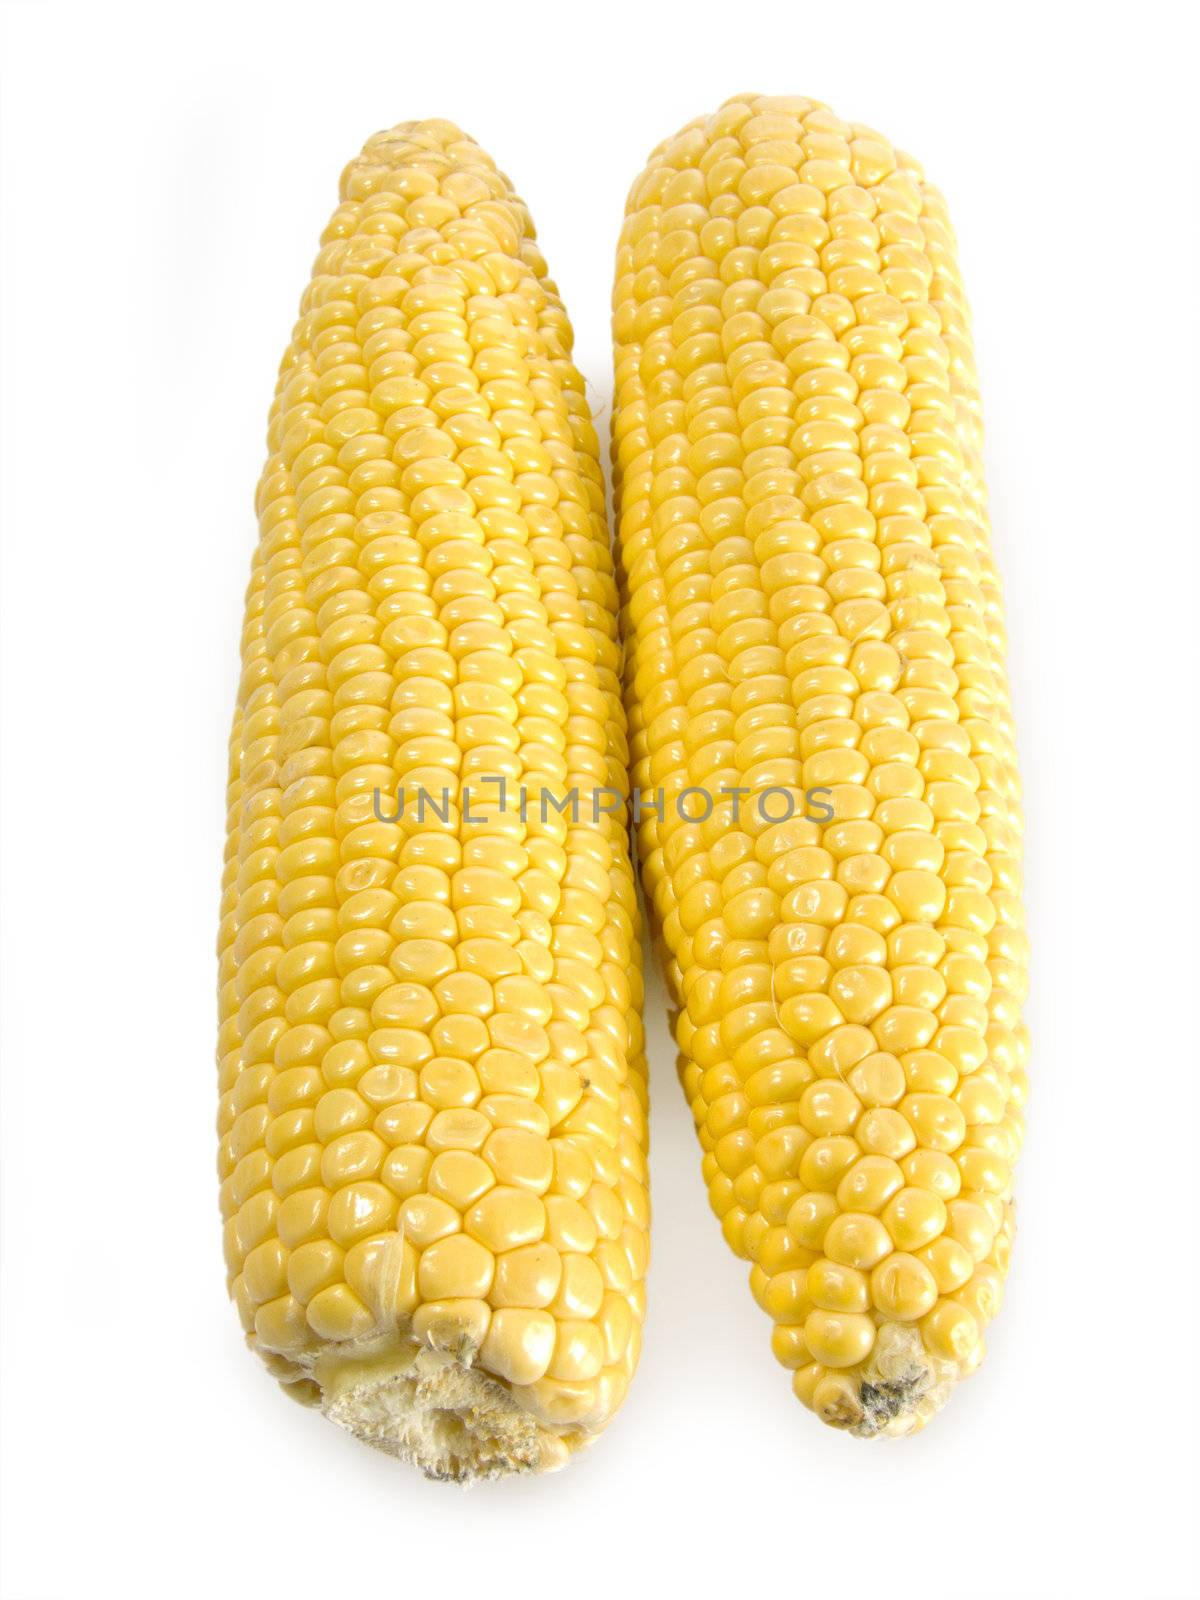 Two fresh corn-cobs over white background